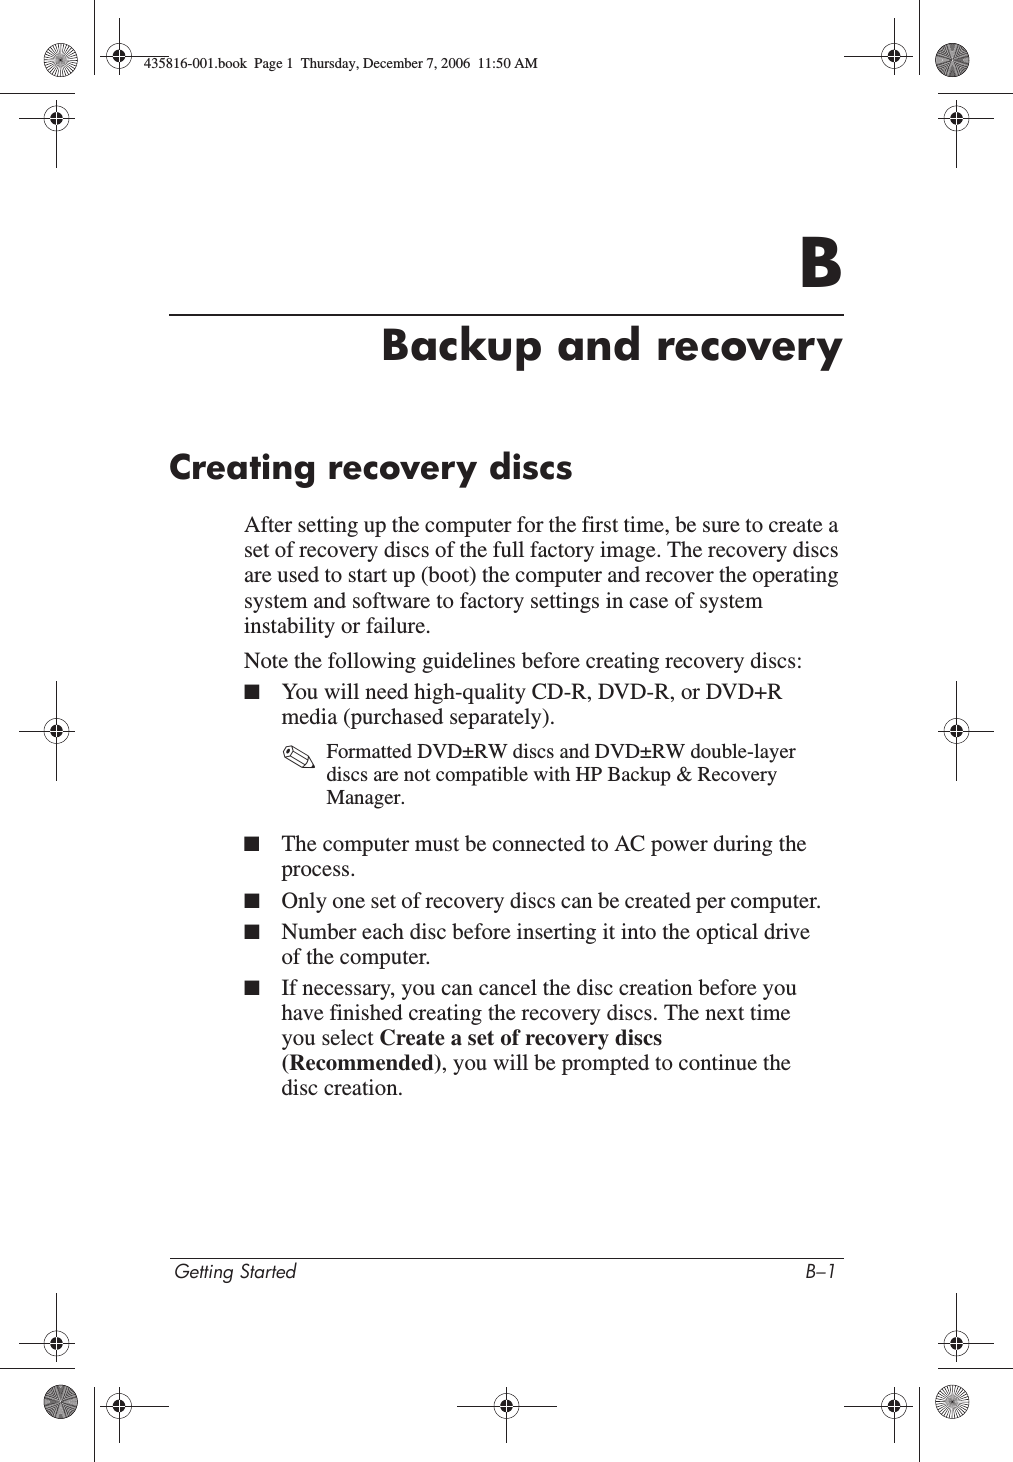 Getting Started B–1BBackup and recoveryCreating recovery discsAfter setting up the computer for the first time, be sure to create a set of recovery discs of the full factory image. The recovery discs are used to start up (boot) the computer and recover the operating system and software to factory settings in case of system instability or failure.Note the following guidelines before creating recovery discs:■You will need high-quality CD-R, DVD-R, or DVD+R media (purchased separately).✎Formatted DVD±RW discs and DVD±RW double-layer discs are not compatible with HP Backup &amp; Recovery Manager.■The computer must be connected to AC power during the process.■Only one set of recovery discs can be created per computer.■Number each disc before inserting it into the optical drive of the computer.■If necessary, you can cancel the disc creation before you have finished creating the recovery discs. The next time you select Create a set of recovery discs (Recommended), you will be prompted to continue the disc creation.435816-001.book  Page 1  Thursday, December 7, 2006  11:50 AM